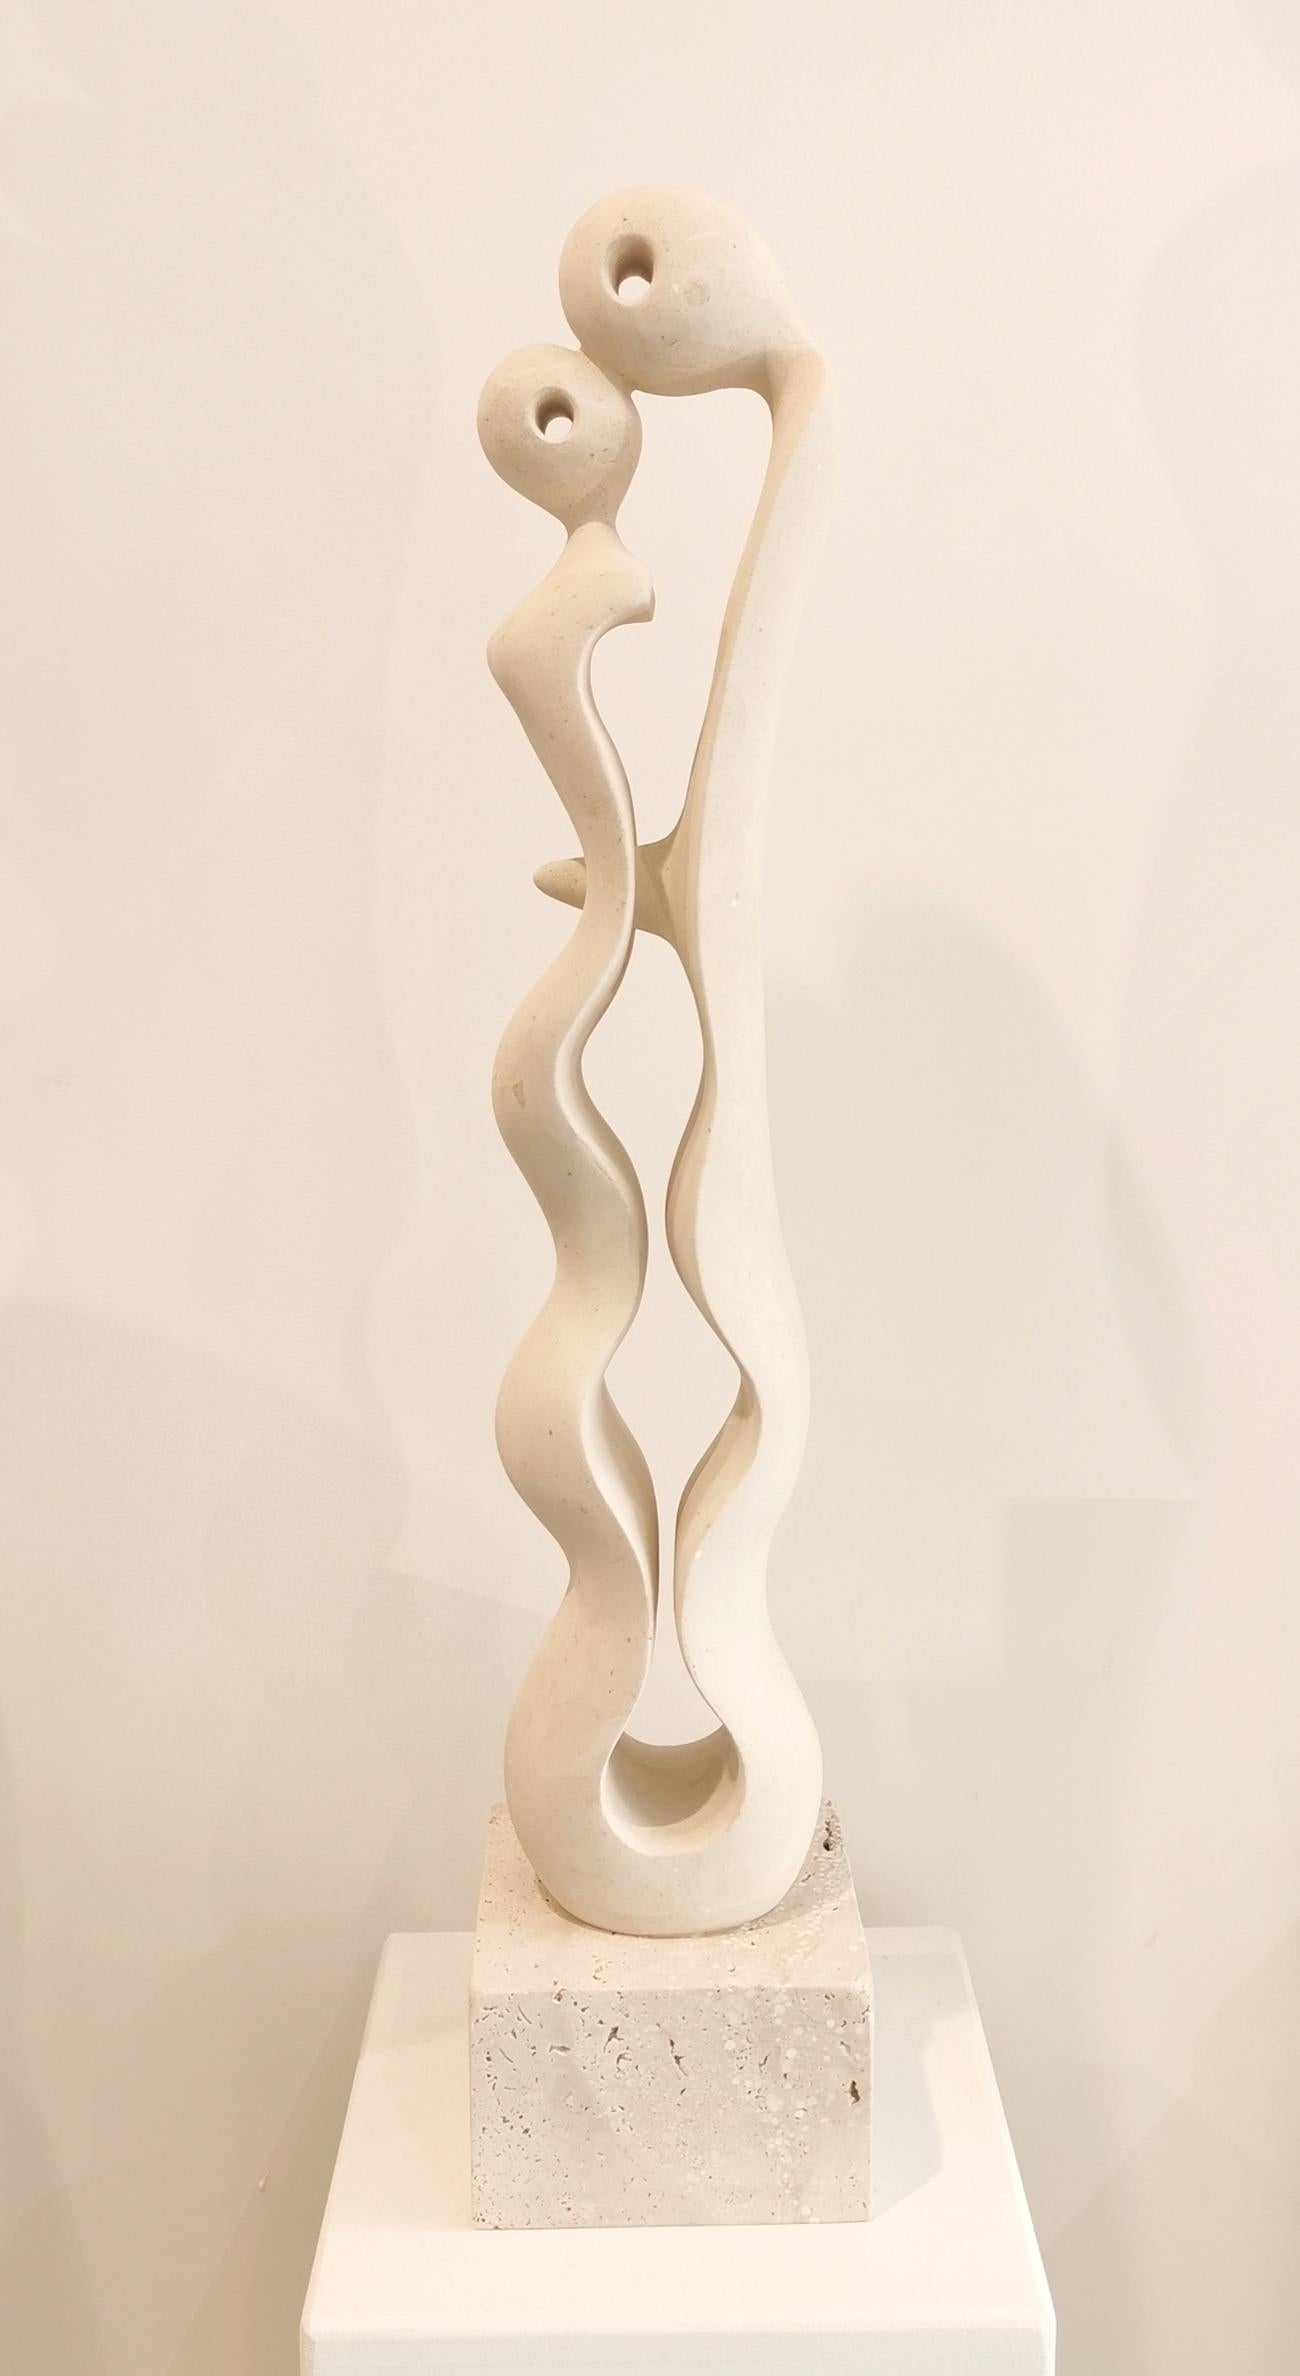 21st century abstract sculpture ALTERIUS by Renzo Buttazzo from Italy (23,62'')

Sculpture in Lecce Stone
Delivered with a certificate of authenticity.
Contact us on 1stDibs to acquire a different size than the one shown here (60 x 11 x 08 cm